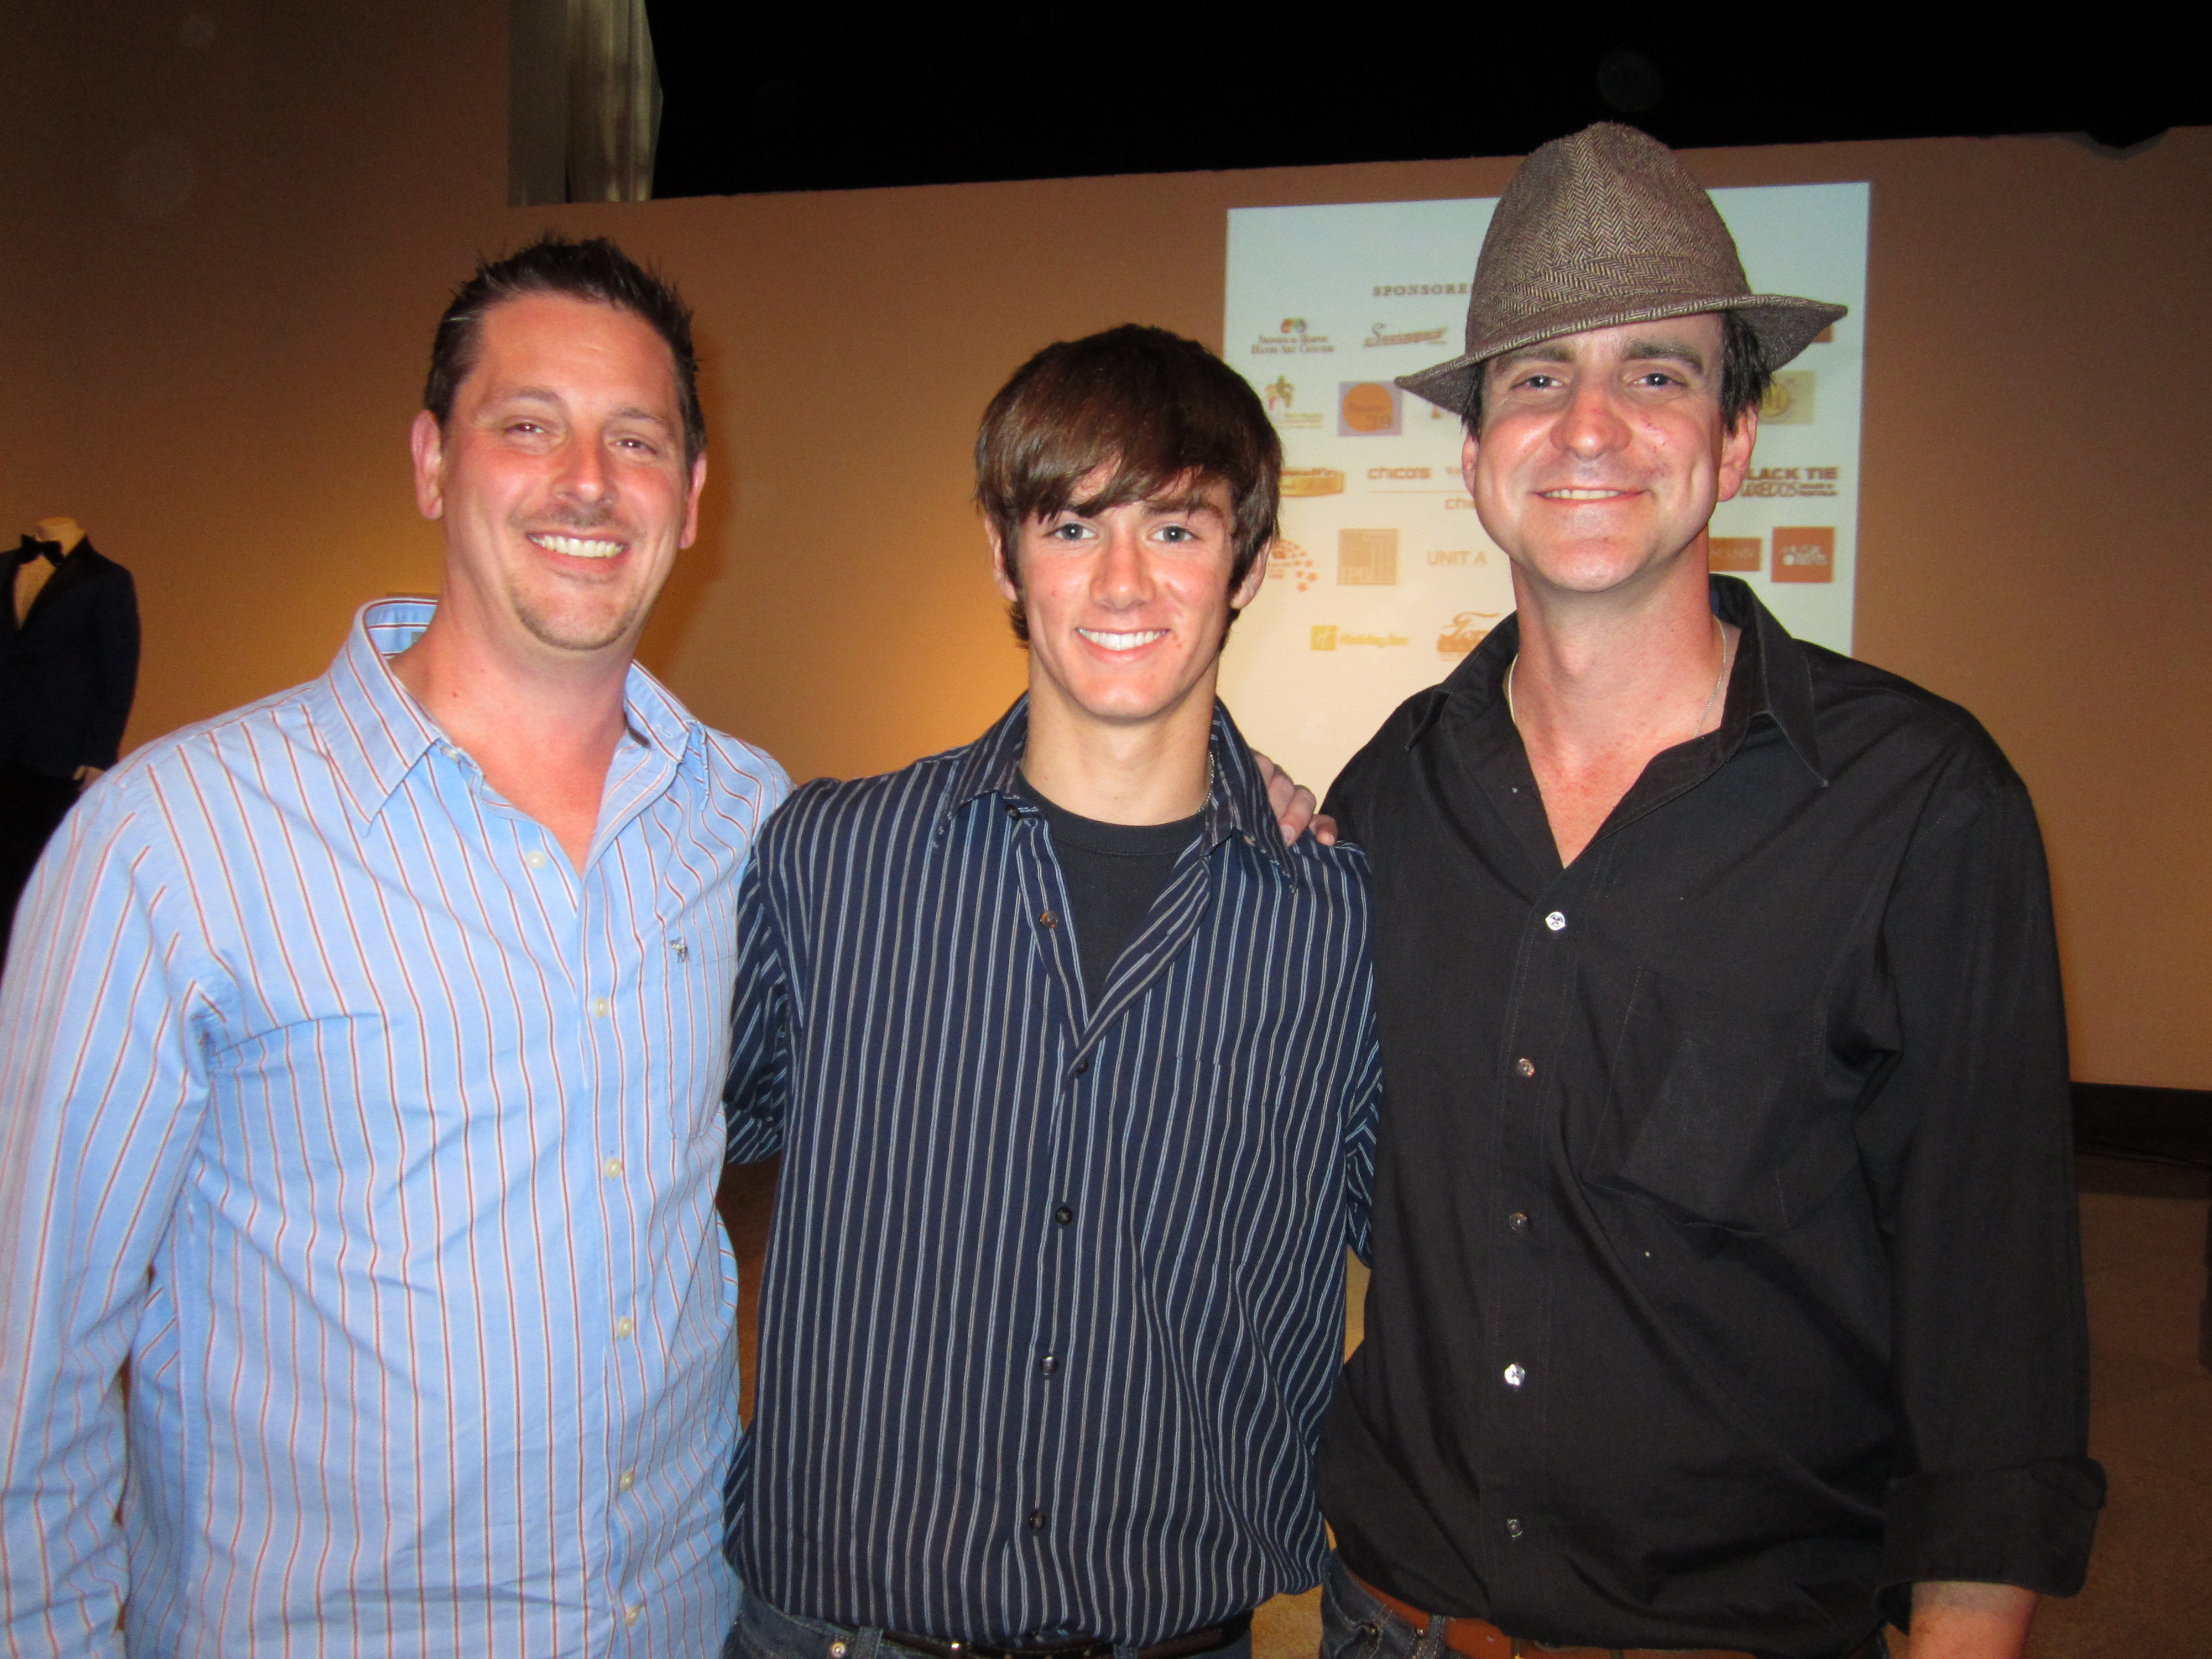 Danny with Michael Dunsworth (Charlies Angels) and Shawn Genther (Actor)